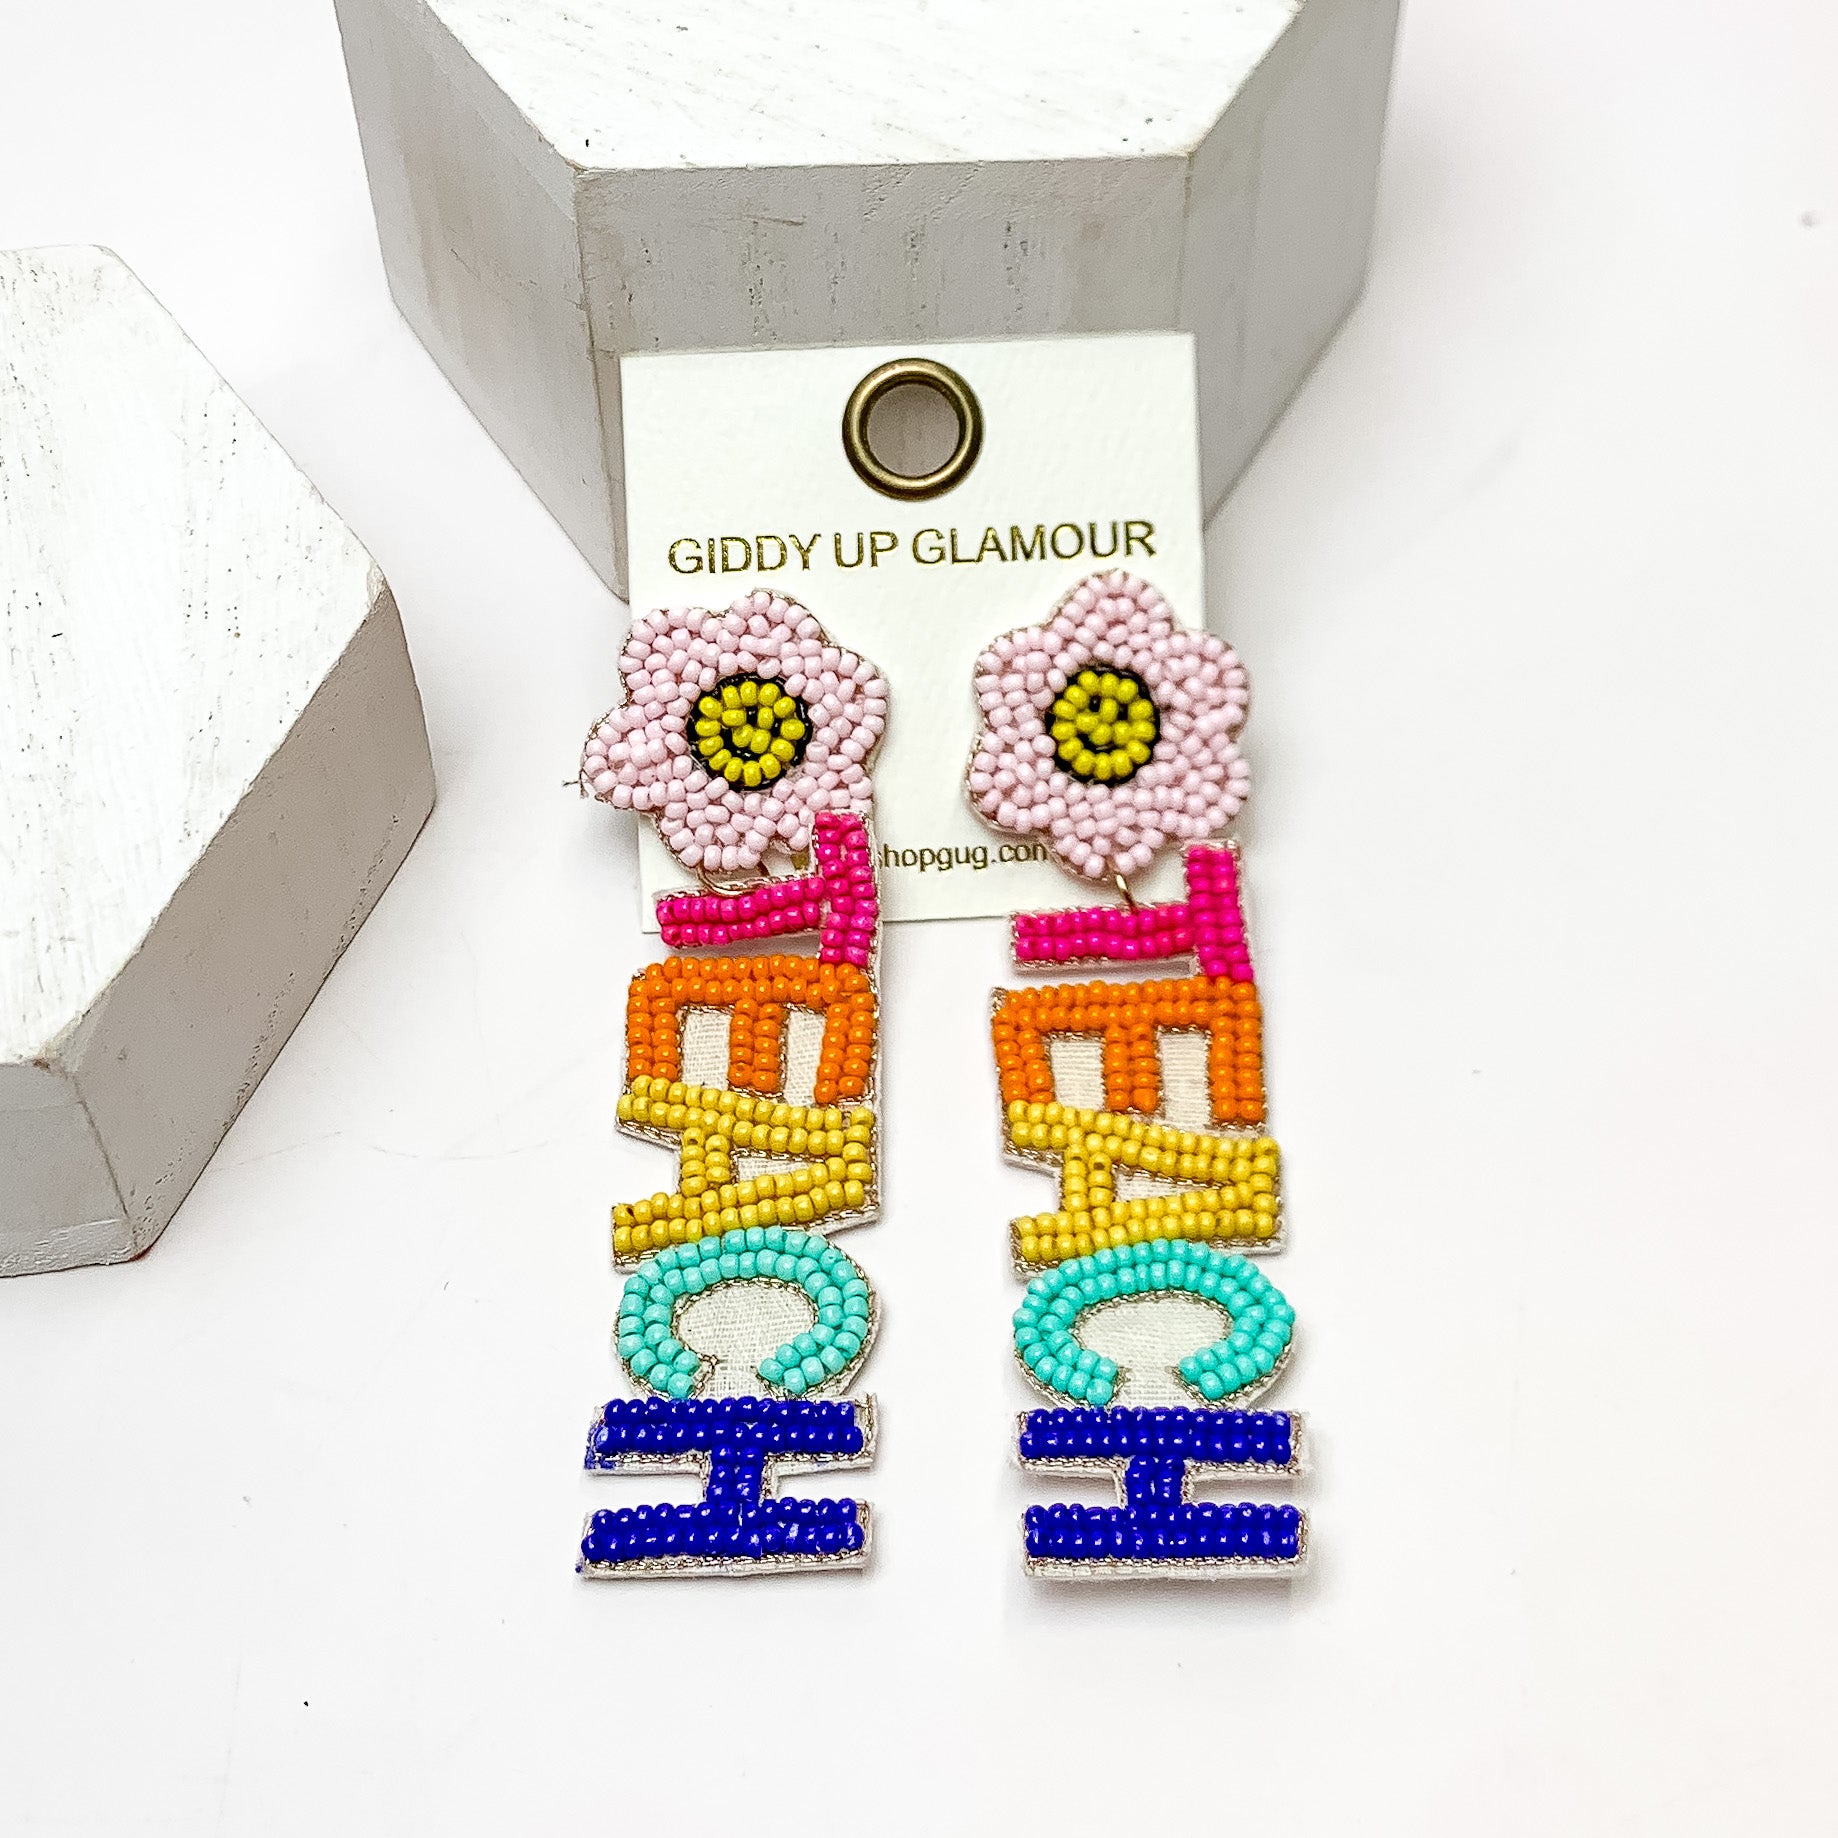 Multicolor "TEACH" Beaded Earrings With Flower Posts. These earrings are on a white background and have white posts around them.